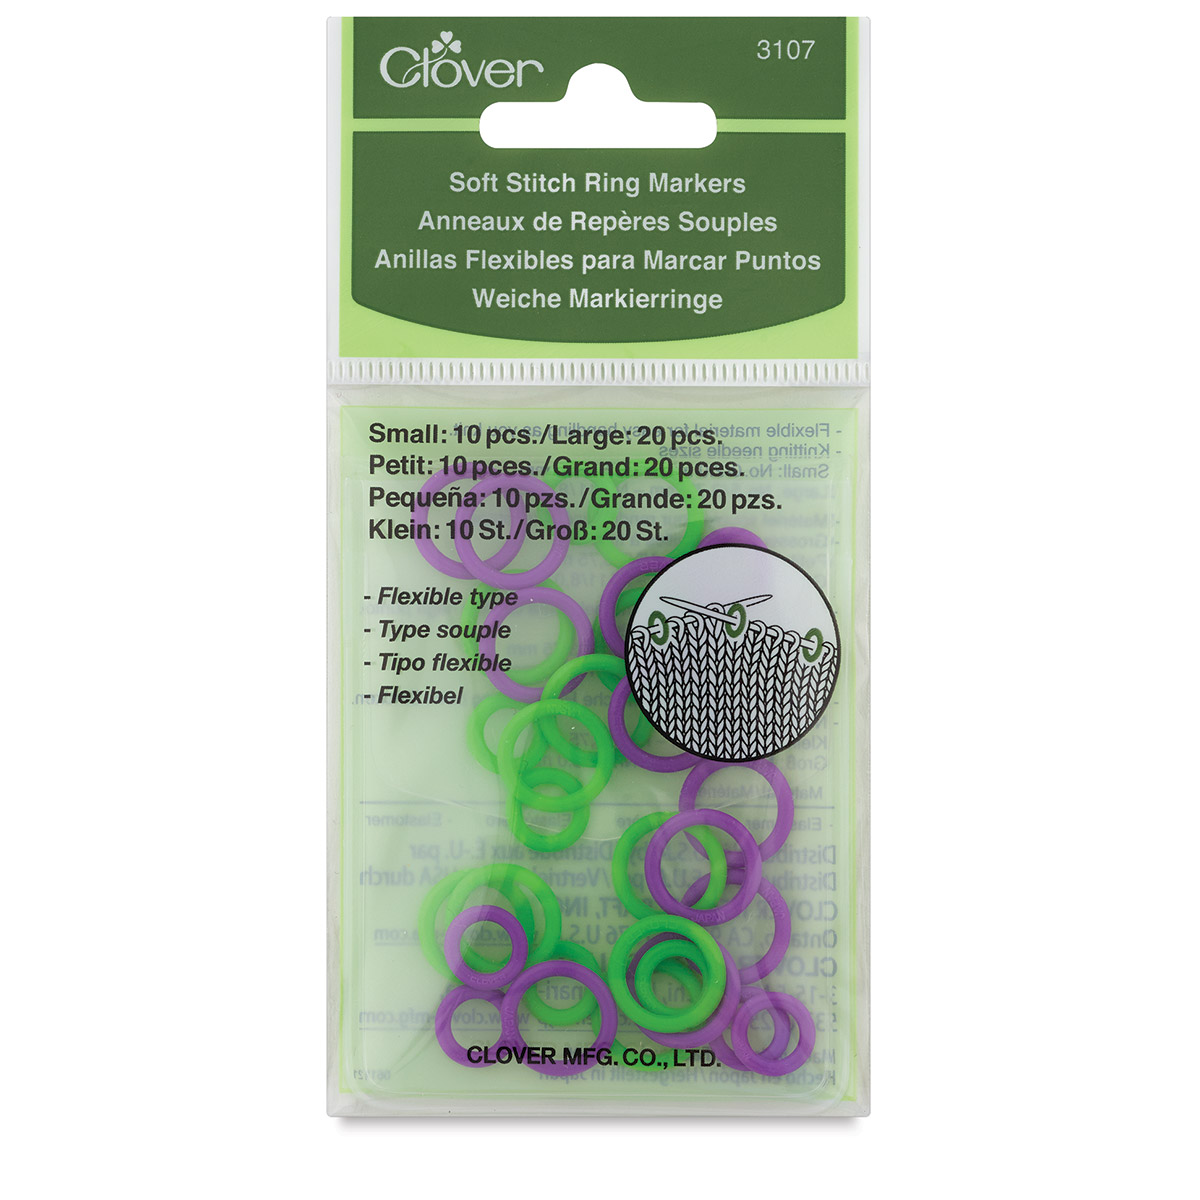 Clover - Soft Stitch Ring Markers